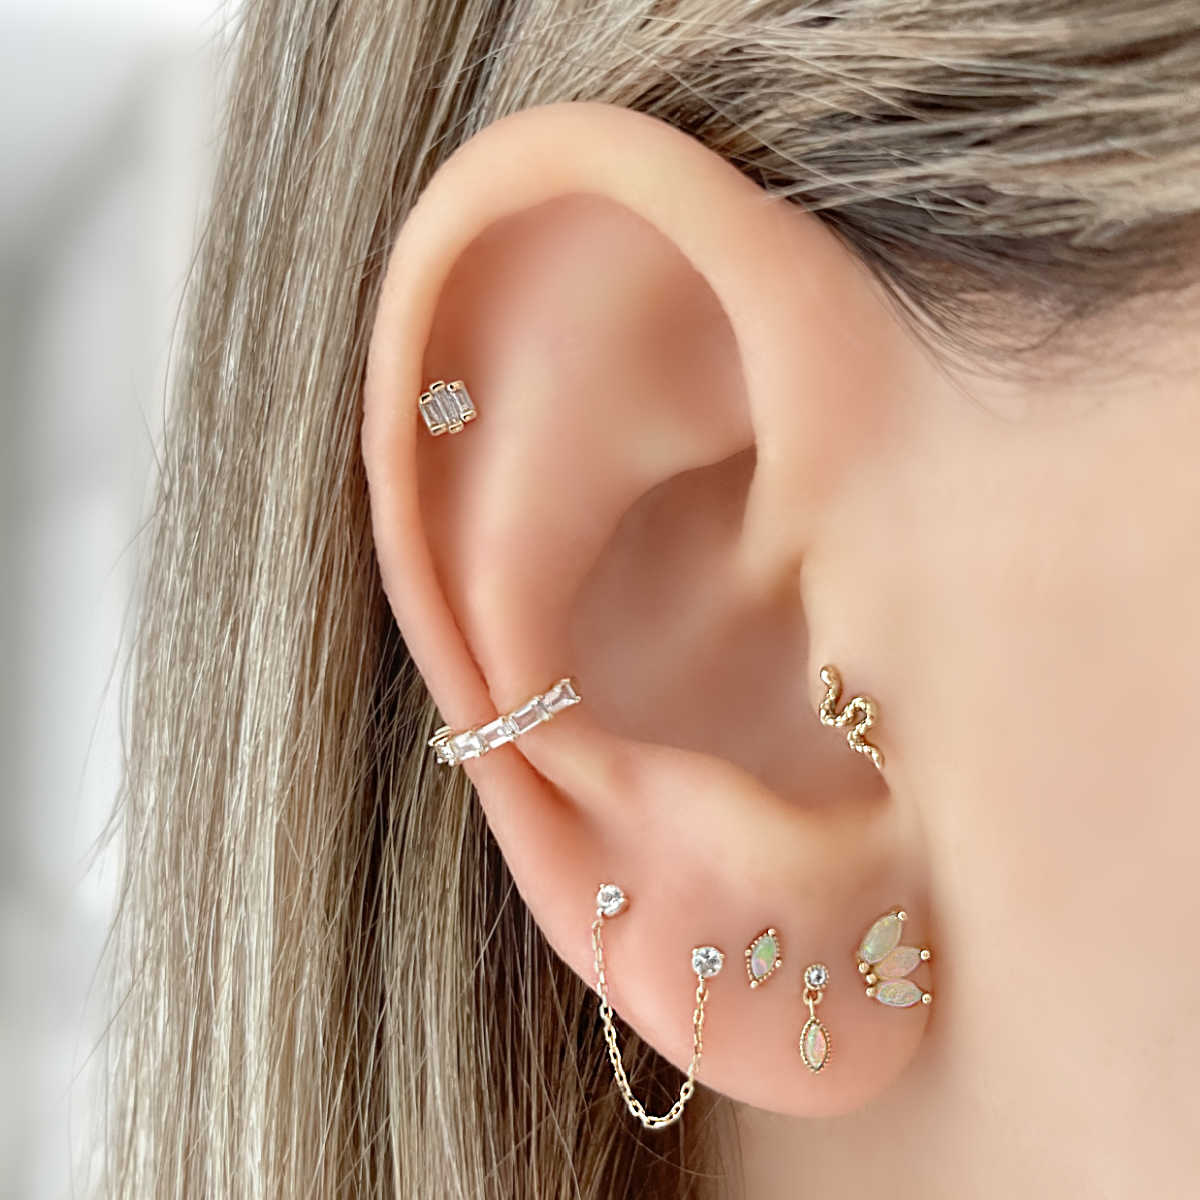 Tragus: the most underappreciated area for piercing